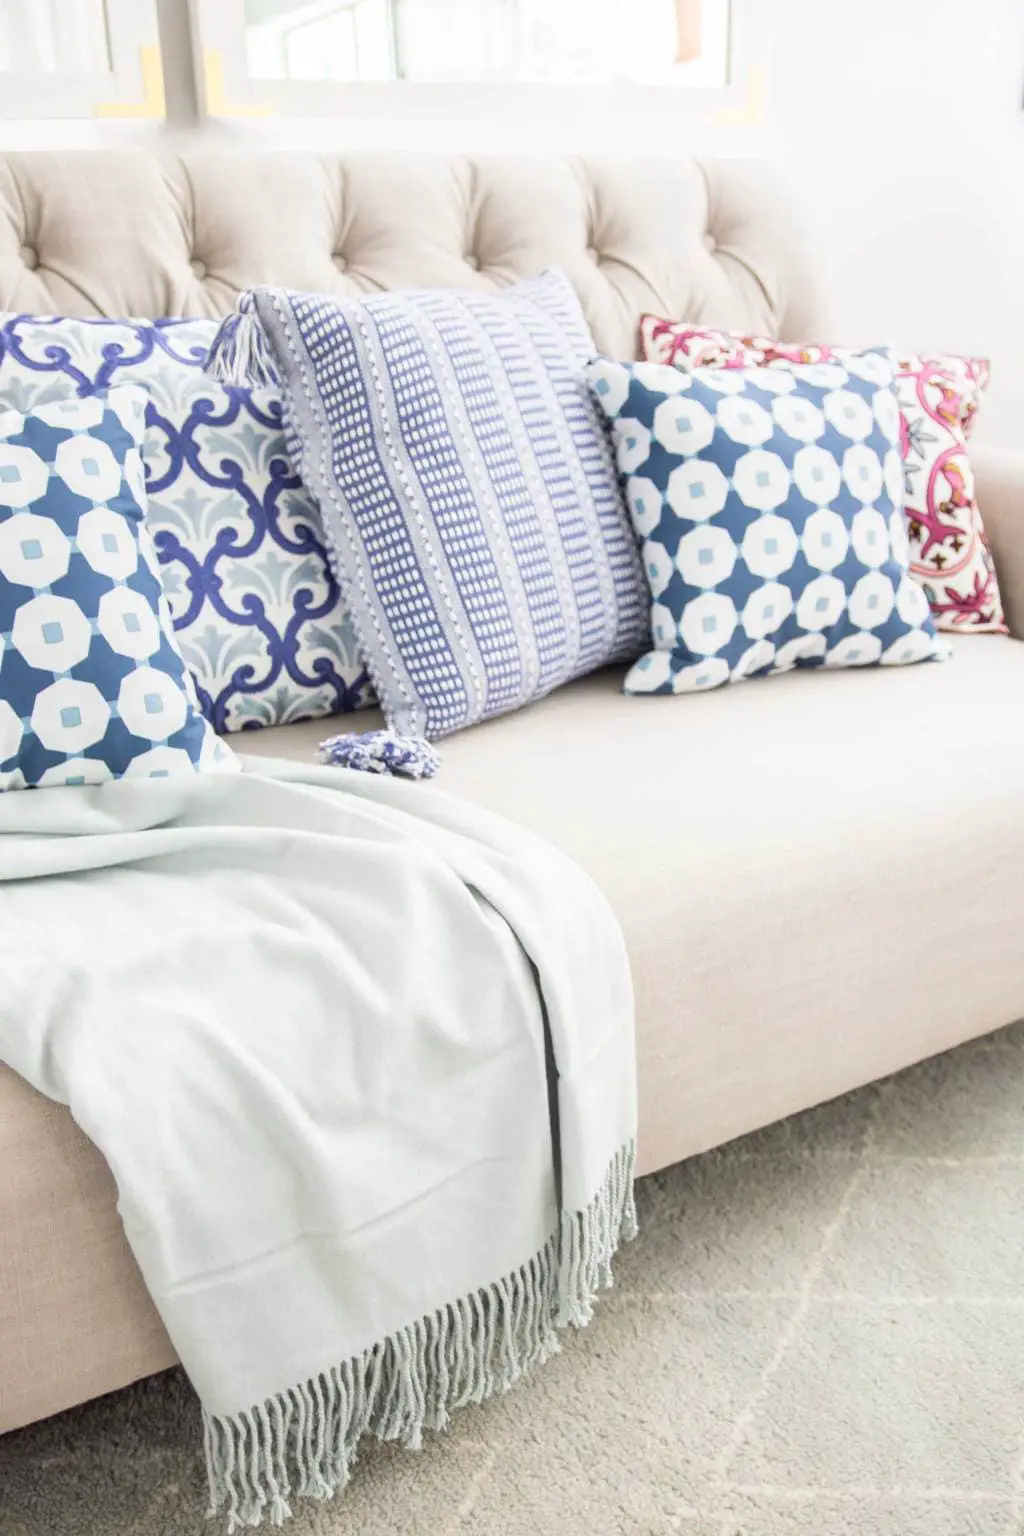 Colorful patterned throw pillows on a tufted sofa in the living room on Thou Swell @thouswellblog